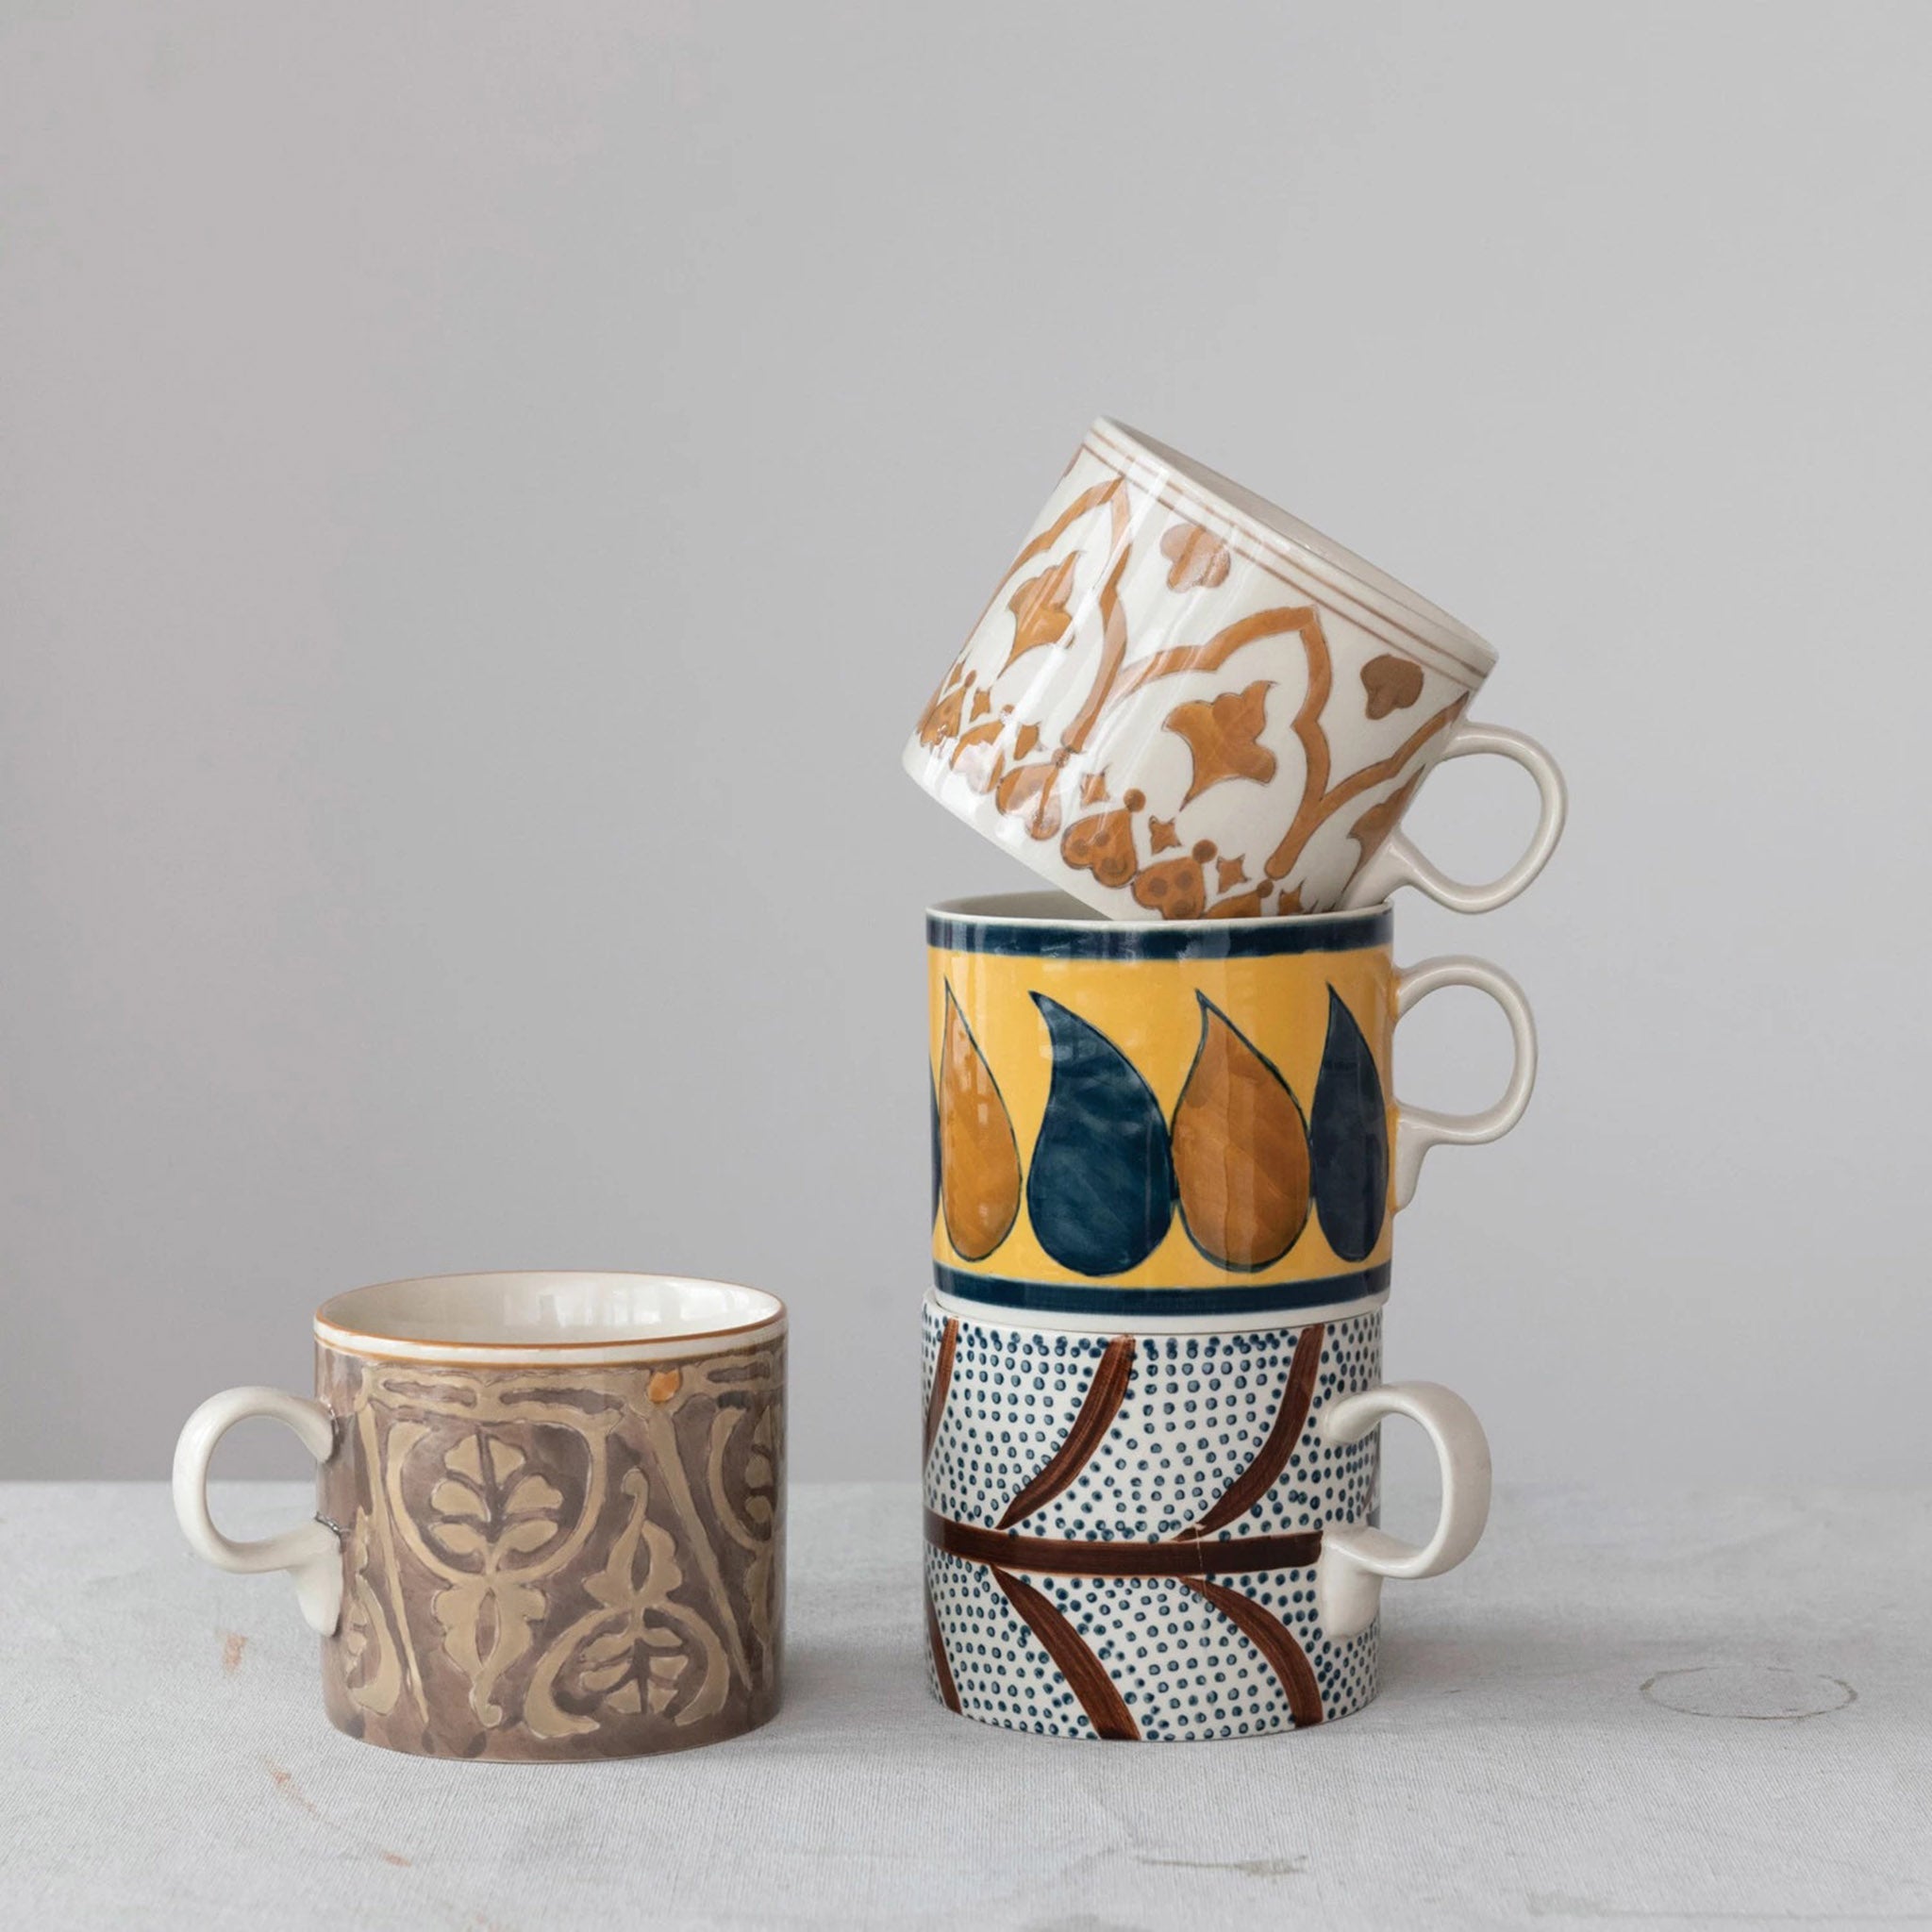 https://blueribbongeneralstore.com/cdn/shop/files/creative-co-op-df6783a-16-ounce-hand-painted-stoneware-mugs-with-brown-blue-and-cream-patterns-in-4-styles-stacked.jpg?v=1692226927